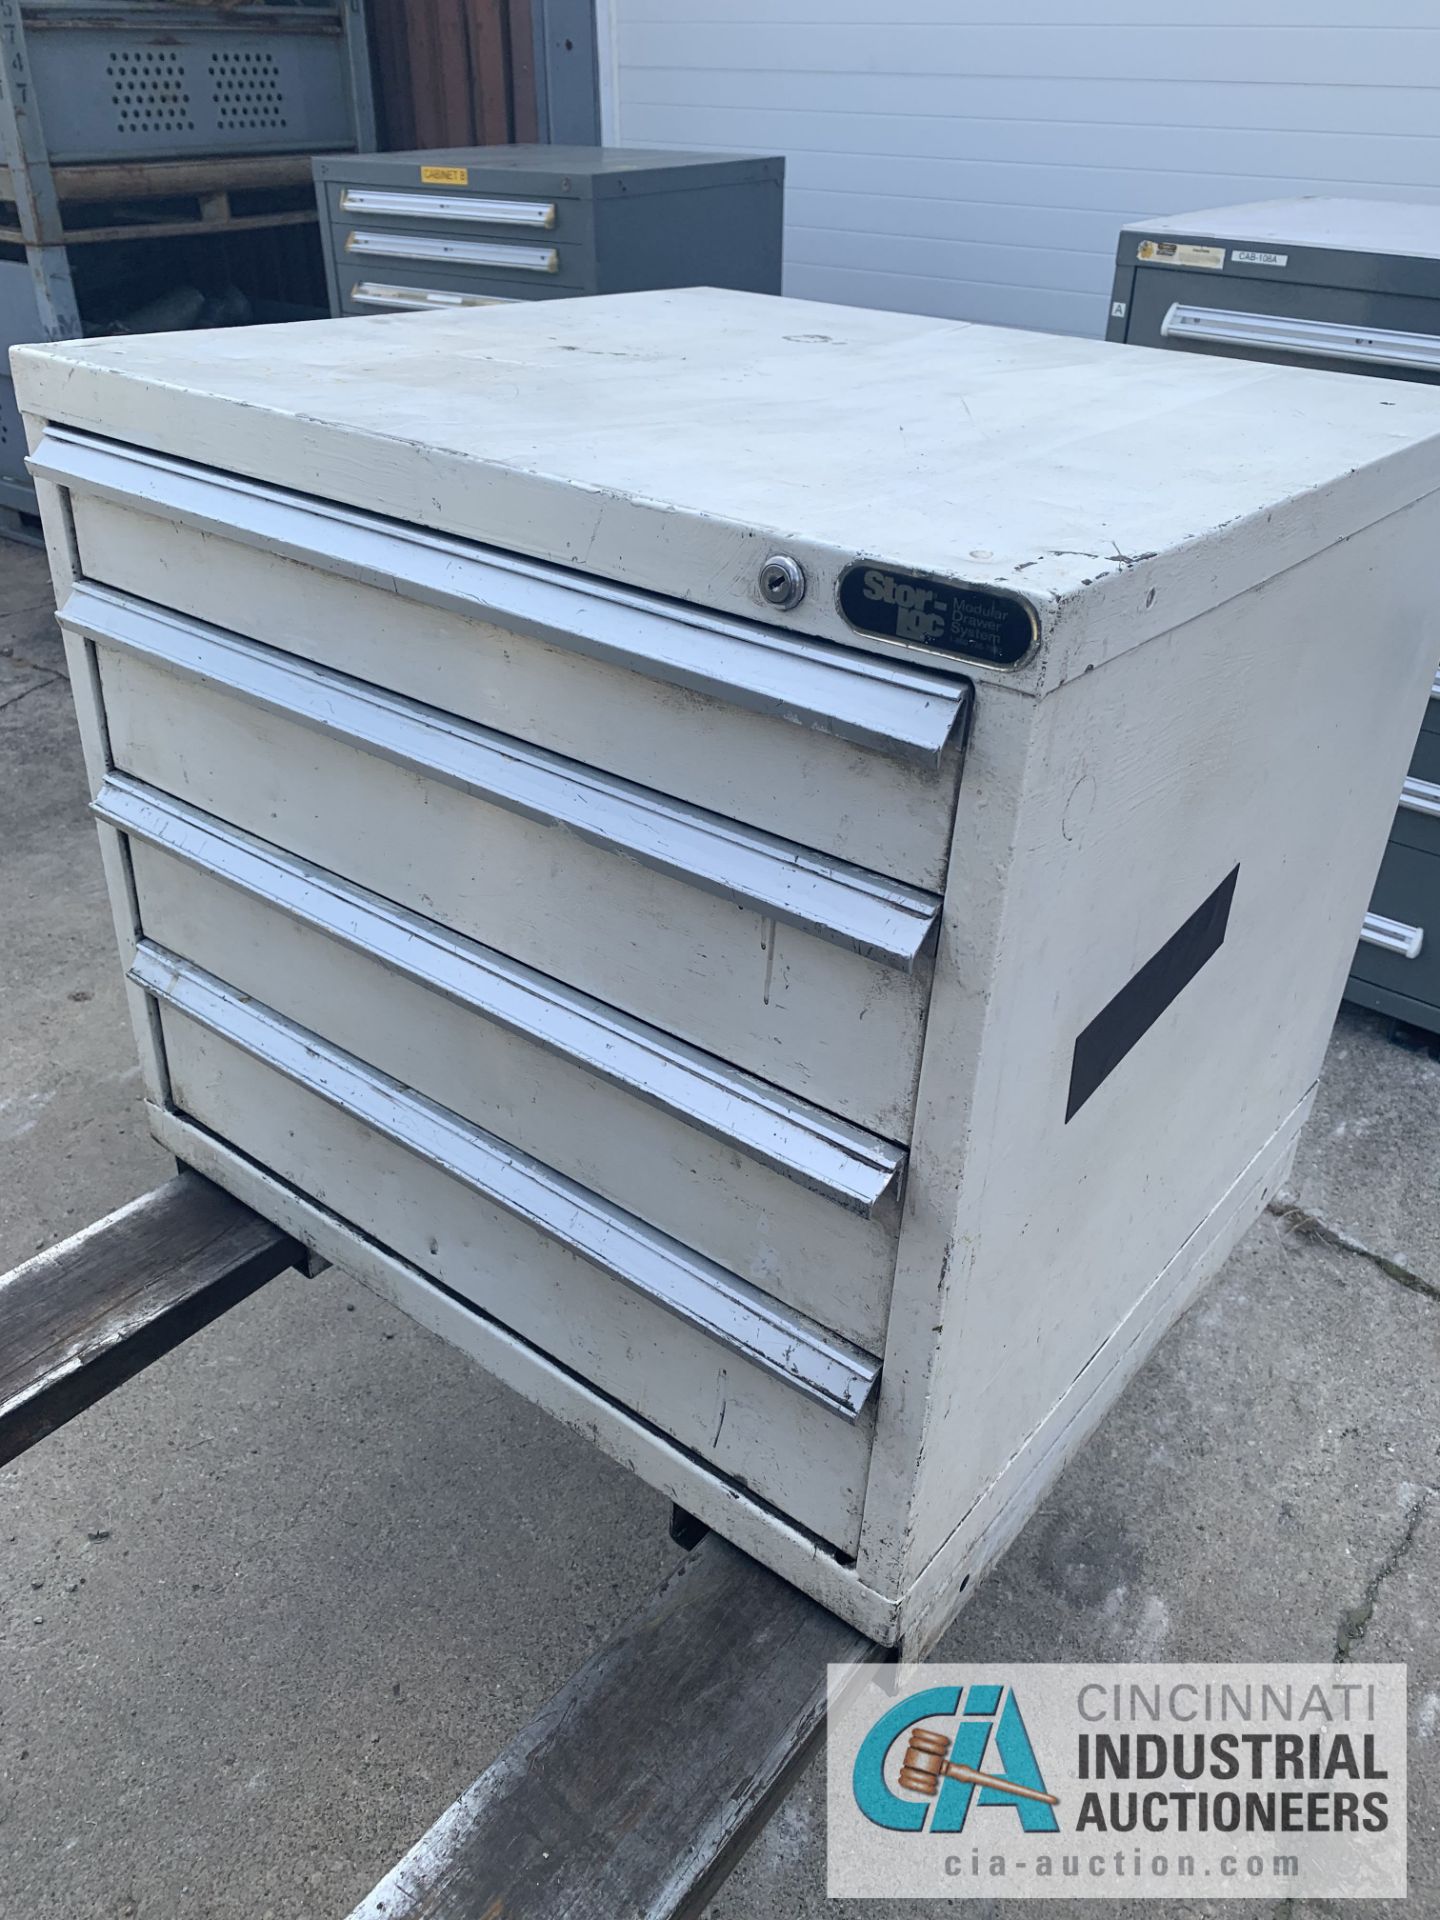 30" X 27" X 30" FOUR-DRAWER VIDMAR TOOL CABINET - $10.00 Rigging Fee Due to Onsite Rigger -